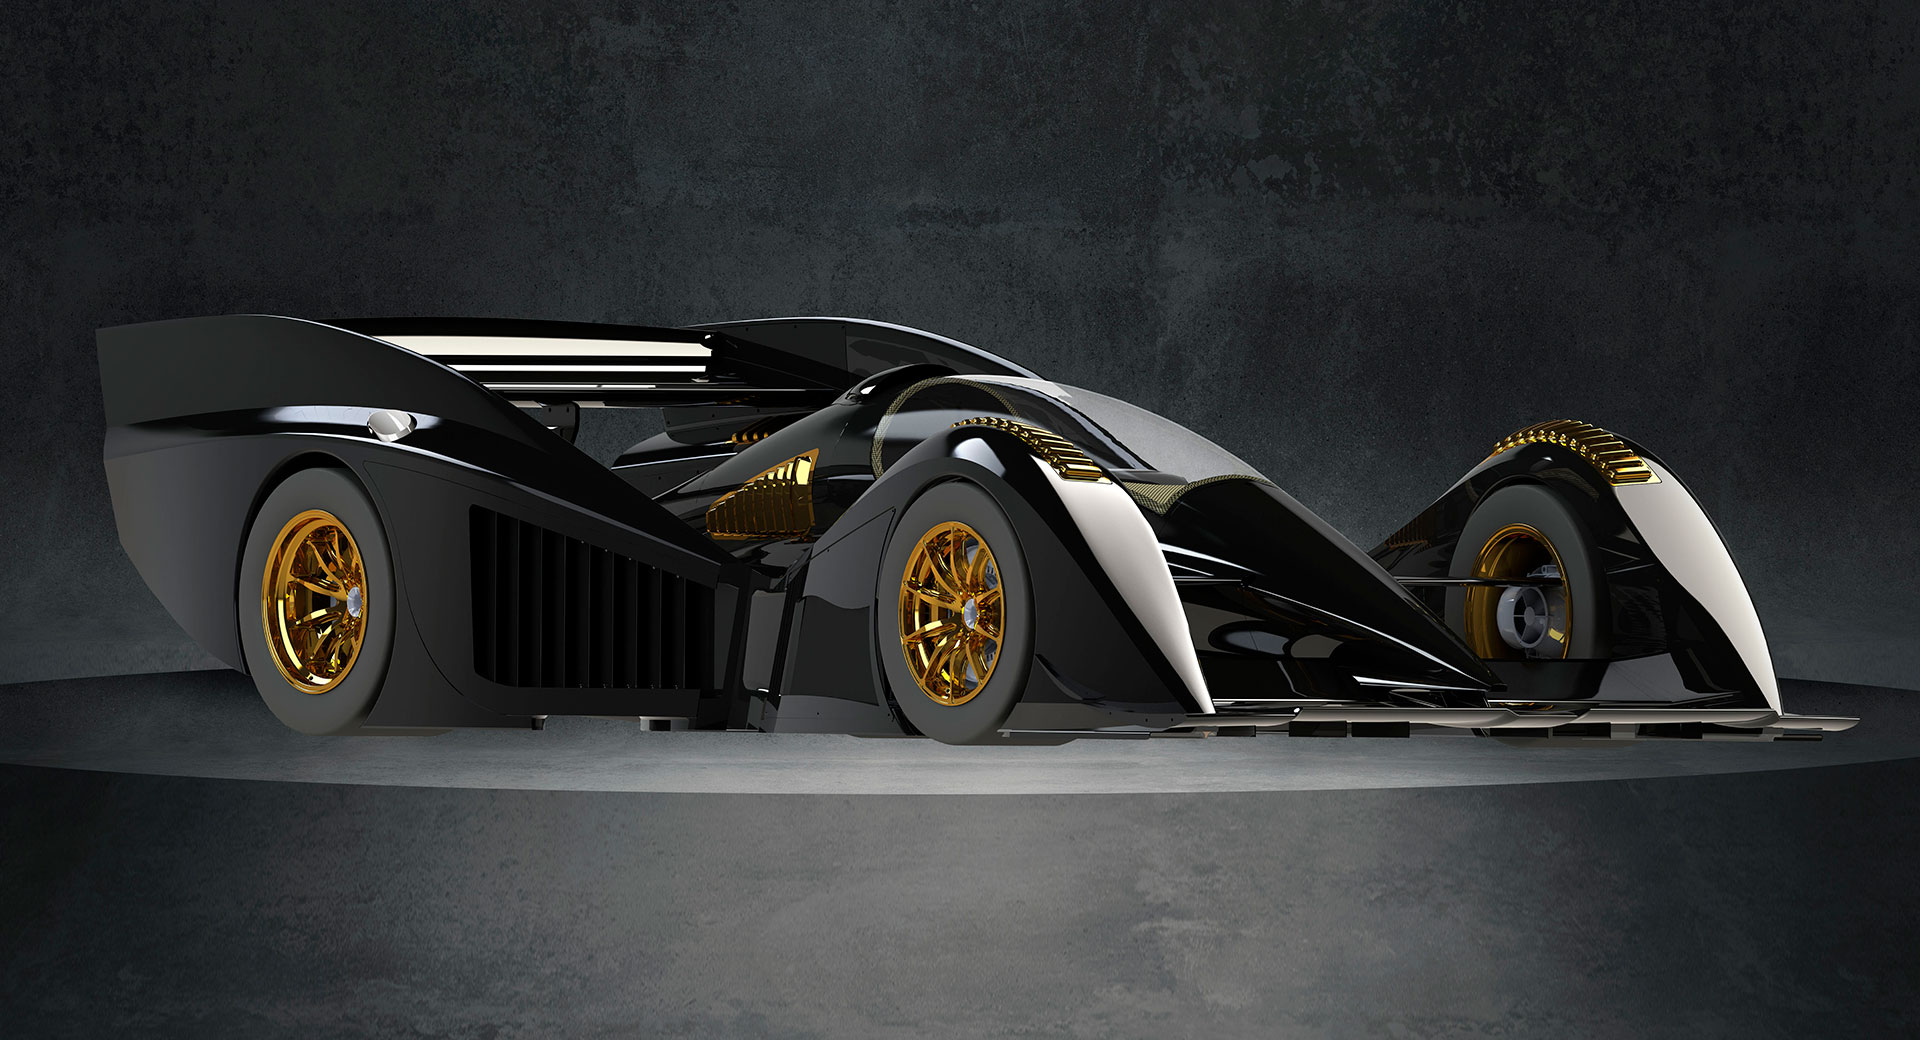 New Zealand’s Rodin FZERO Is Going Into Production With 1,159 HP And 4,000 KG Of Downforce